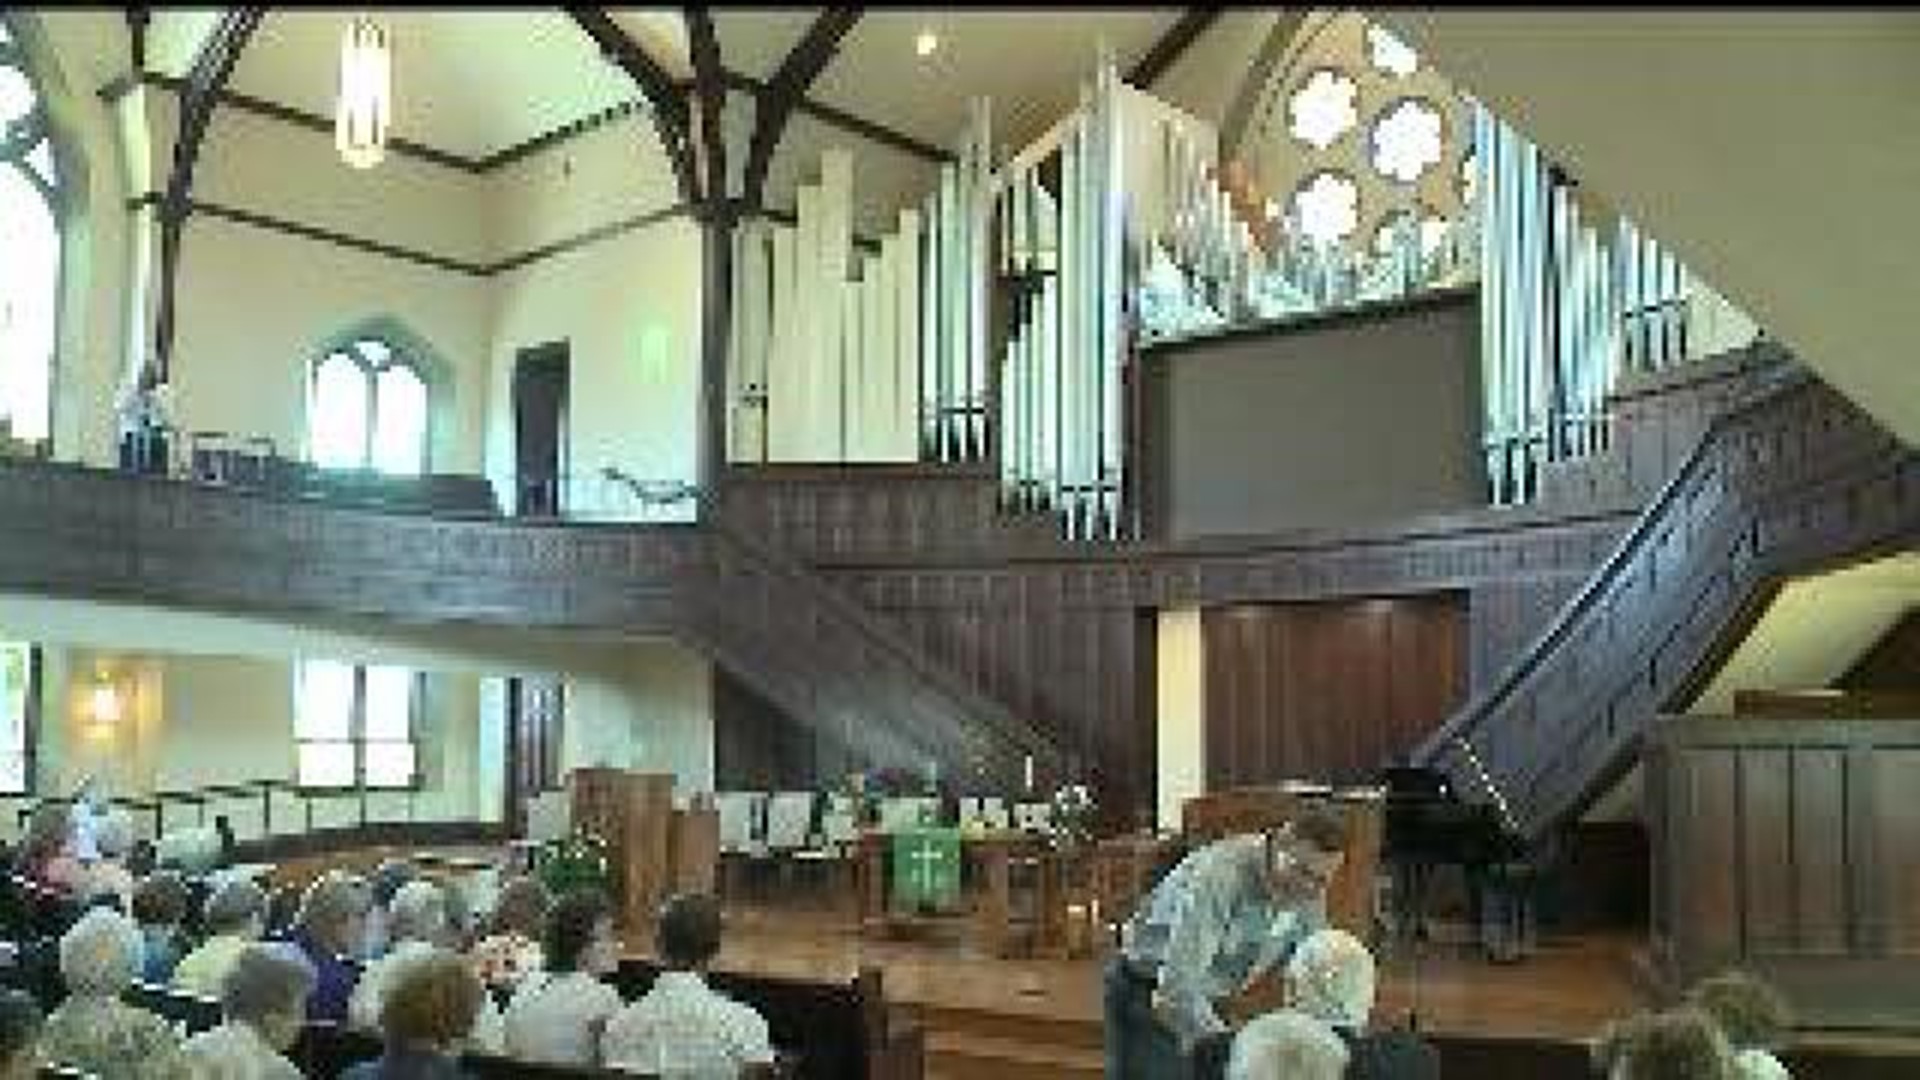 Congregation is back in Burlington church after arson